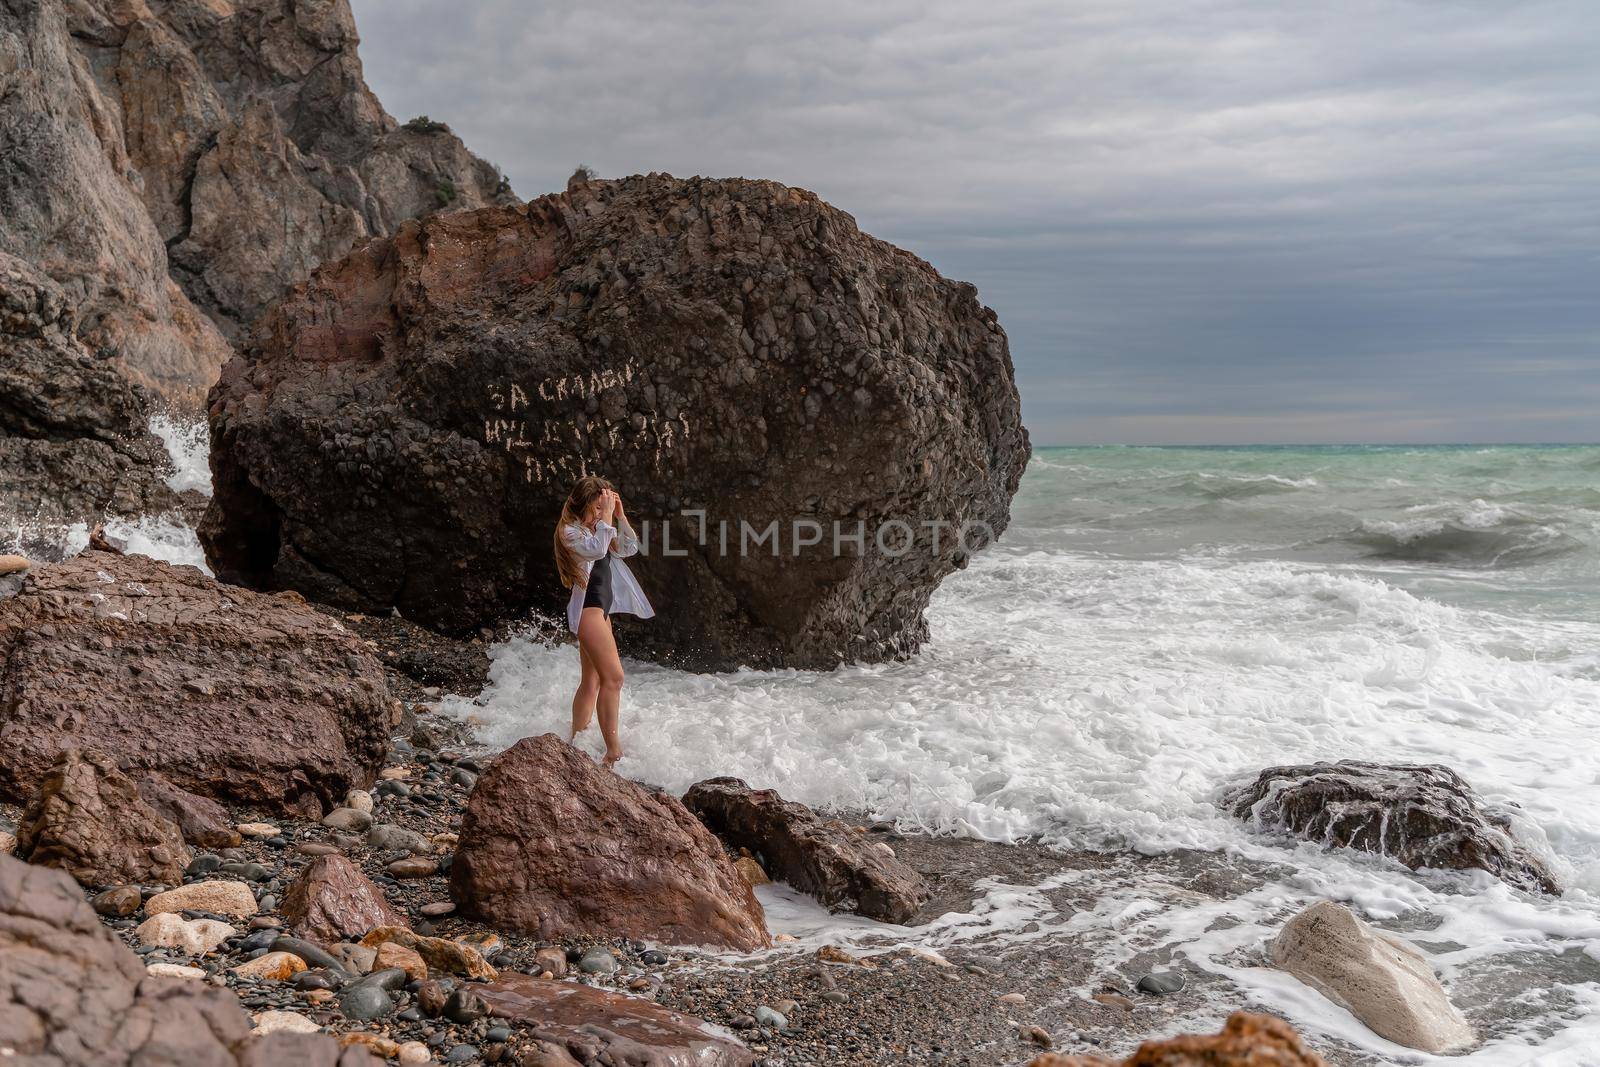 A beautiful girl in a black dress is walking on the waves, big waves with white foam. A cloudy stormy day at sea, with clouds and big waves hitting the rocks